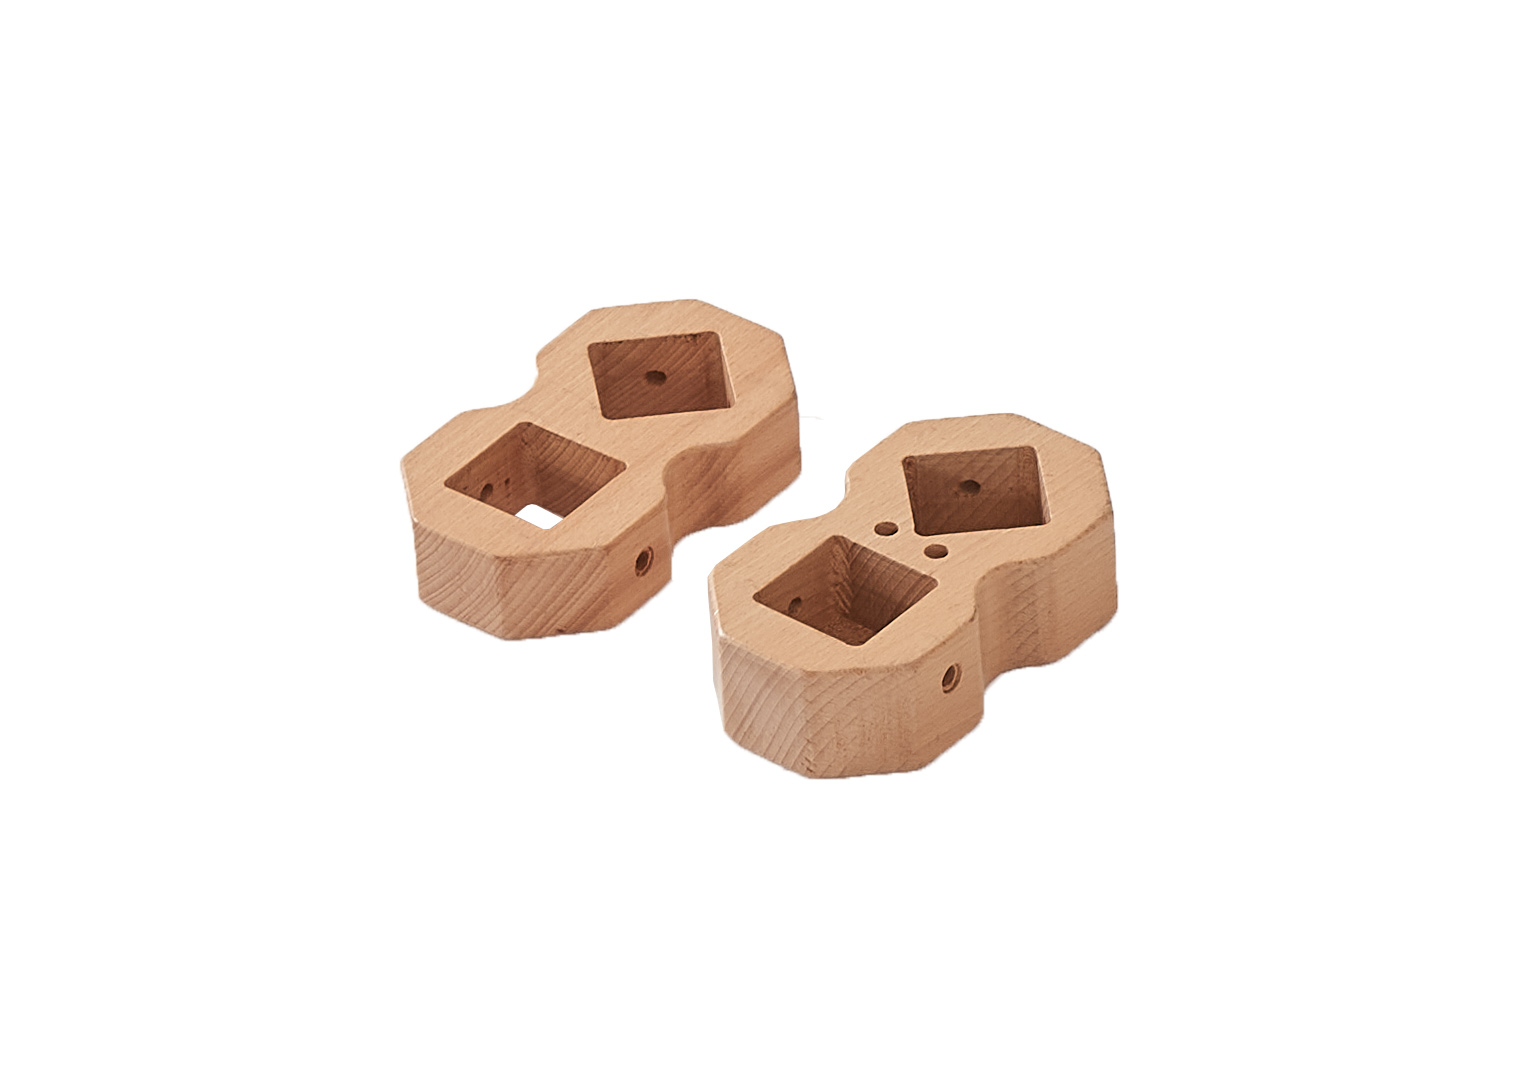 Type II Connector 2-Piece Set - 2 Panels of Equal Heights at 135° Inner Angle